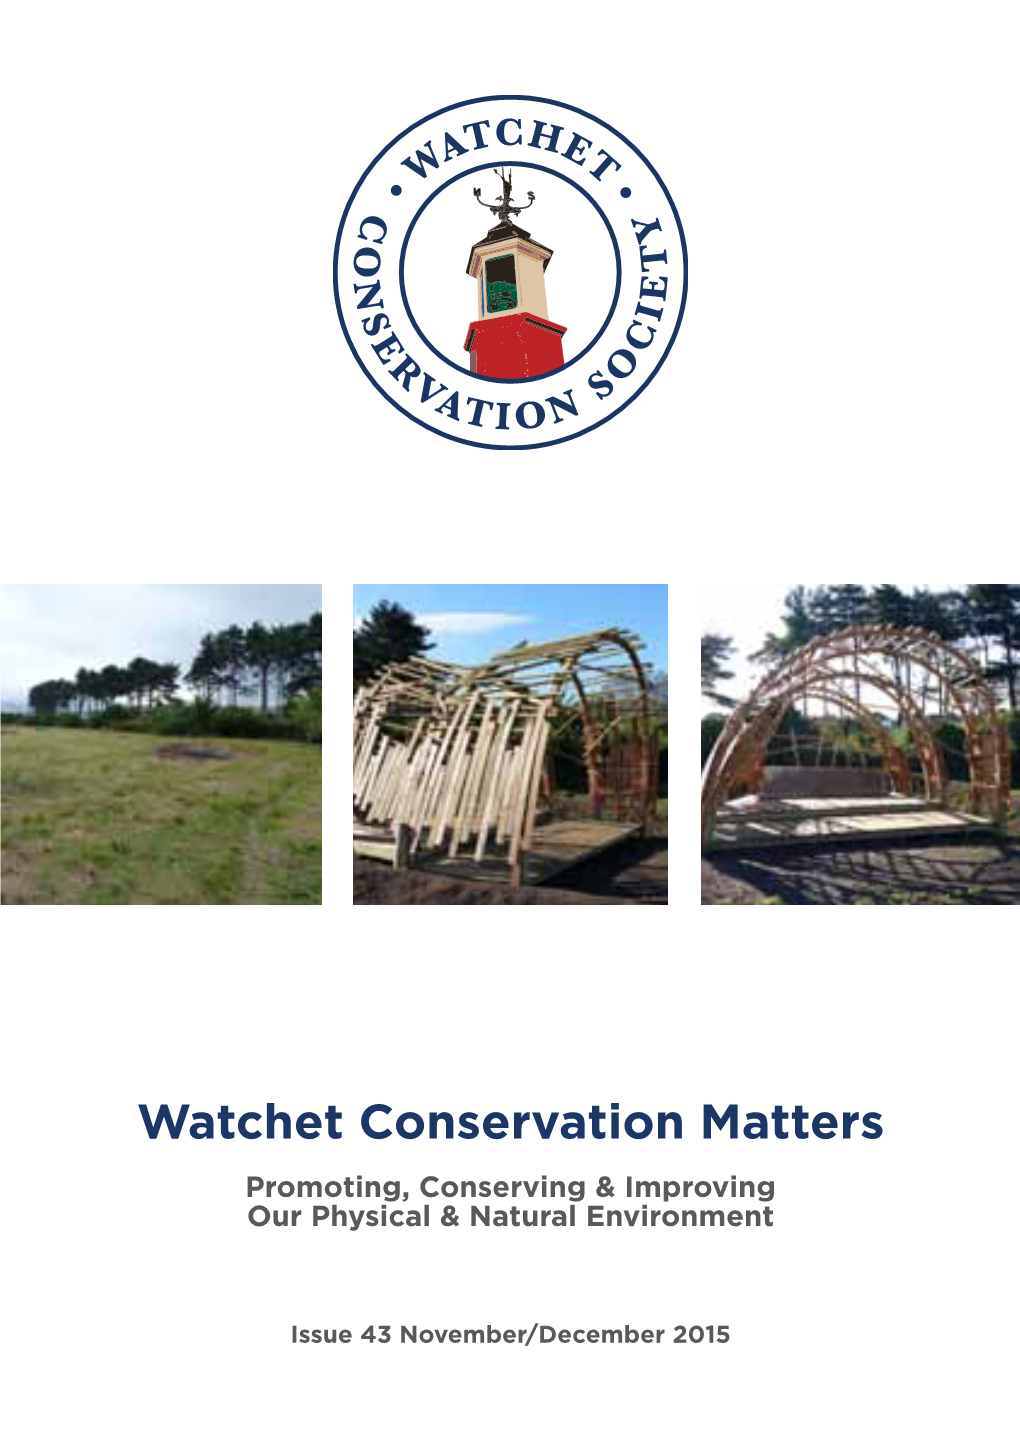 Watchet Conservation Matters Promoting, Conserving & Improving Our Physical & Natural Environment